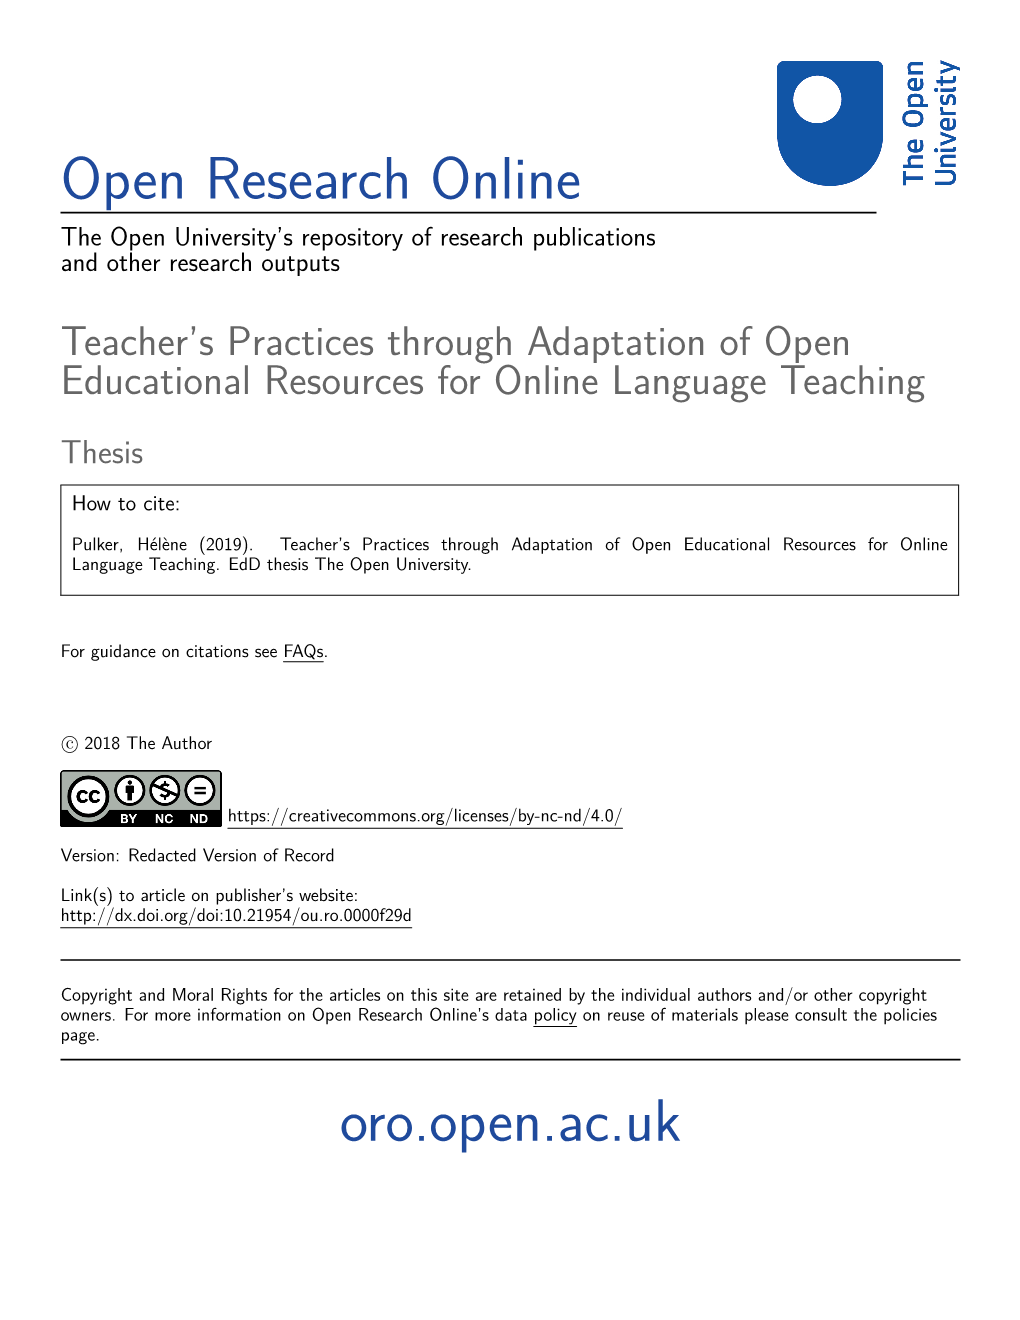 Teacher's Practices Through Adaptation of Open Educational Resources for Online Language Teaching